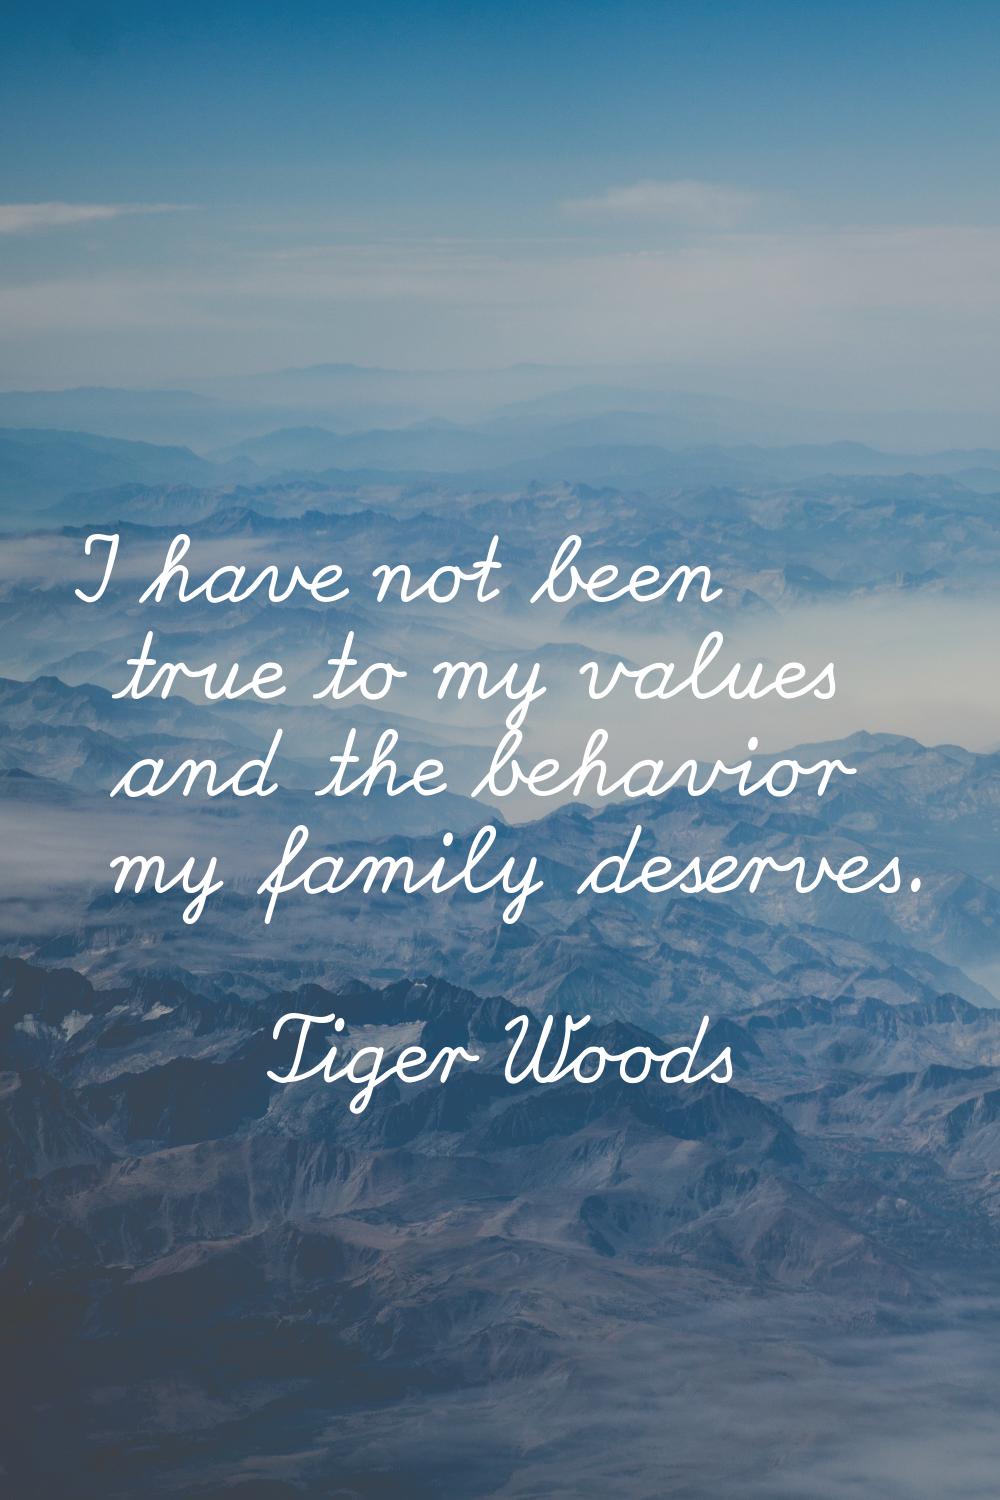 I have not been true to my values and the behavior my family deserves.